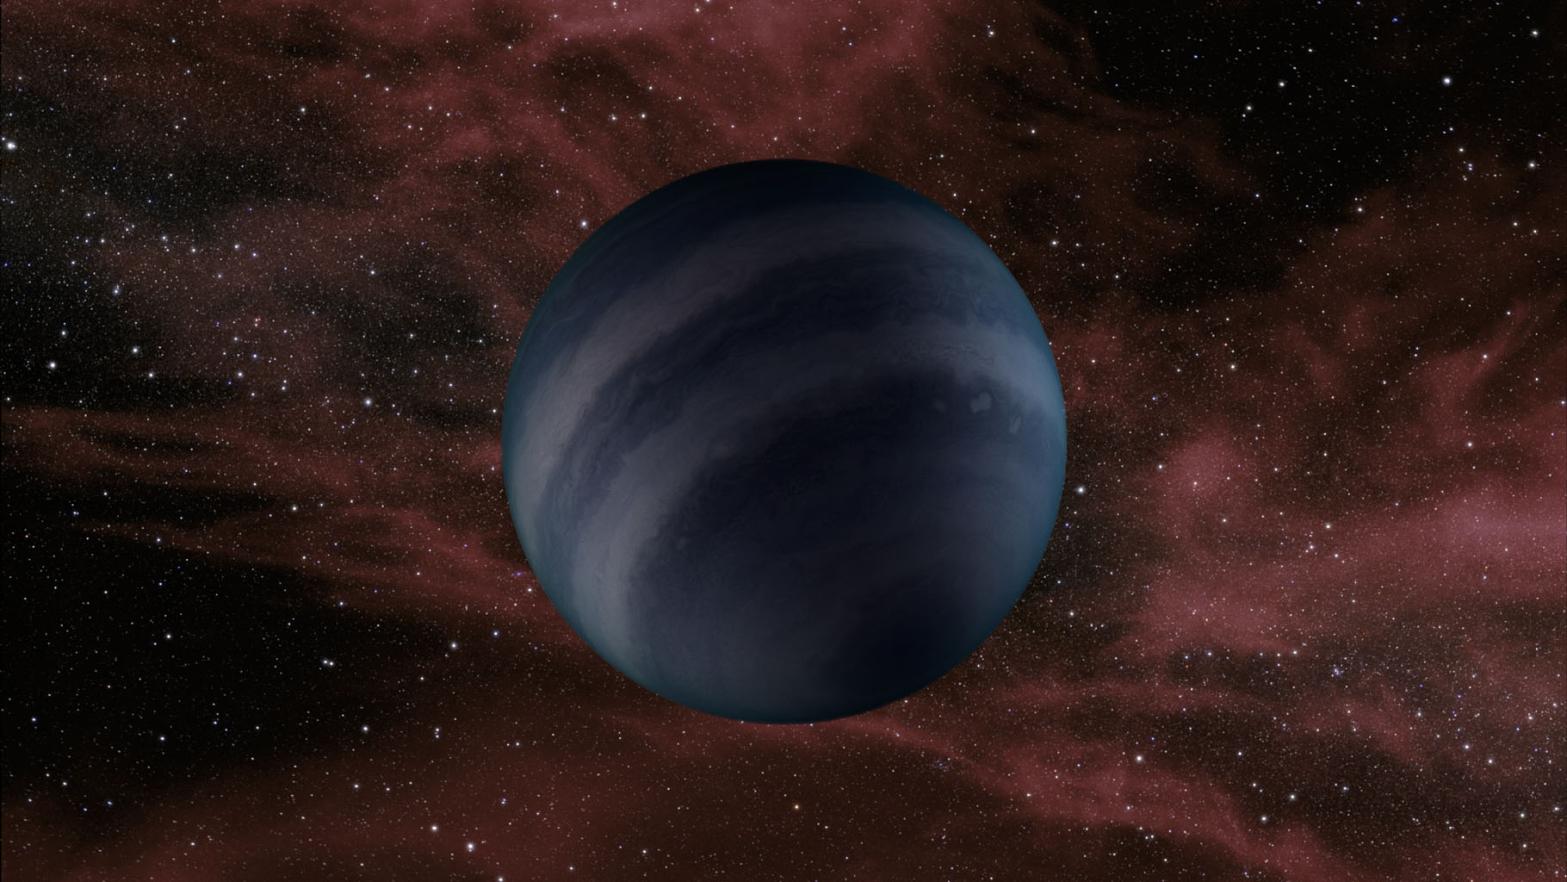 Artistic conception of a dark brown dwarf, which could resemble hypothetical black dwarfs, which are predicted to exist in the far future.  (Image: NASA / JPL-Caltech)